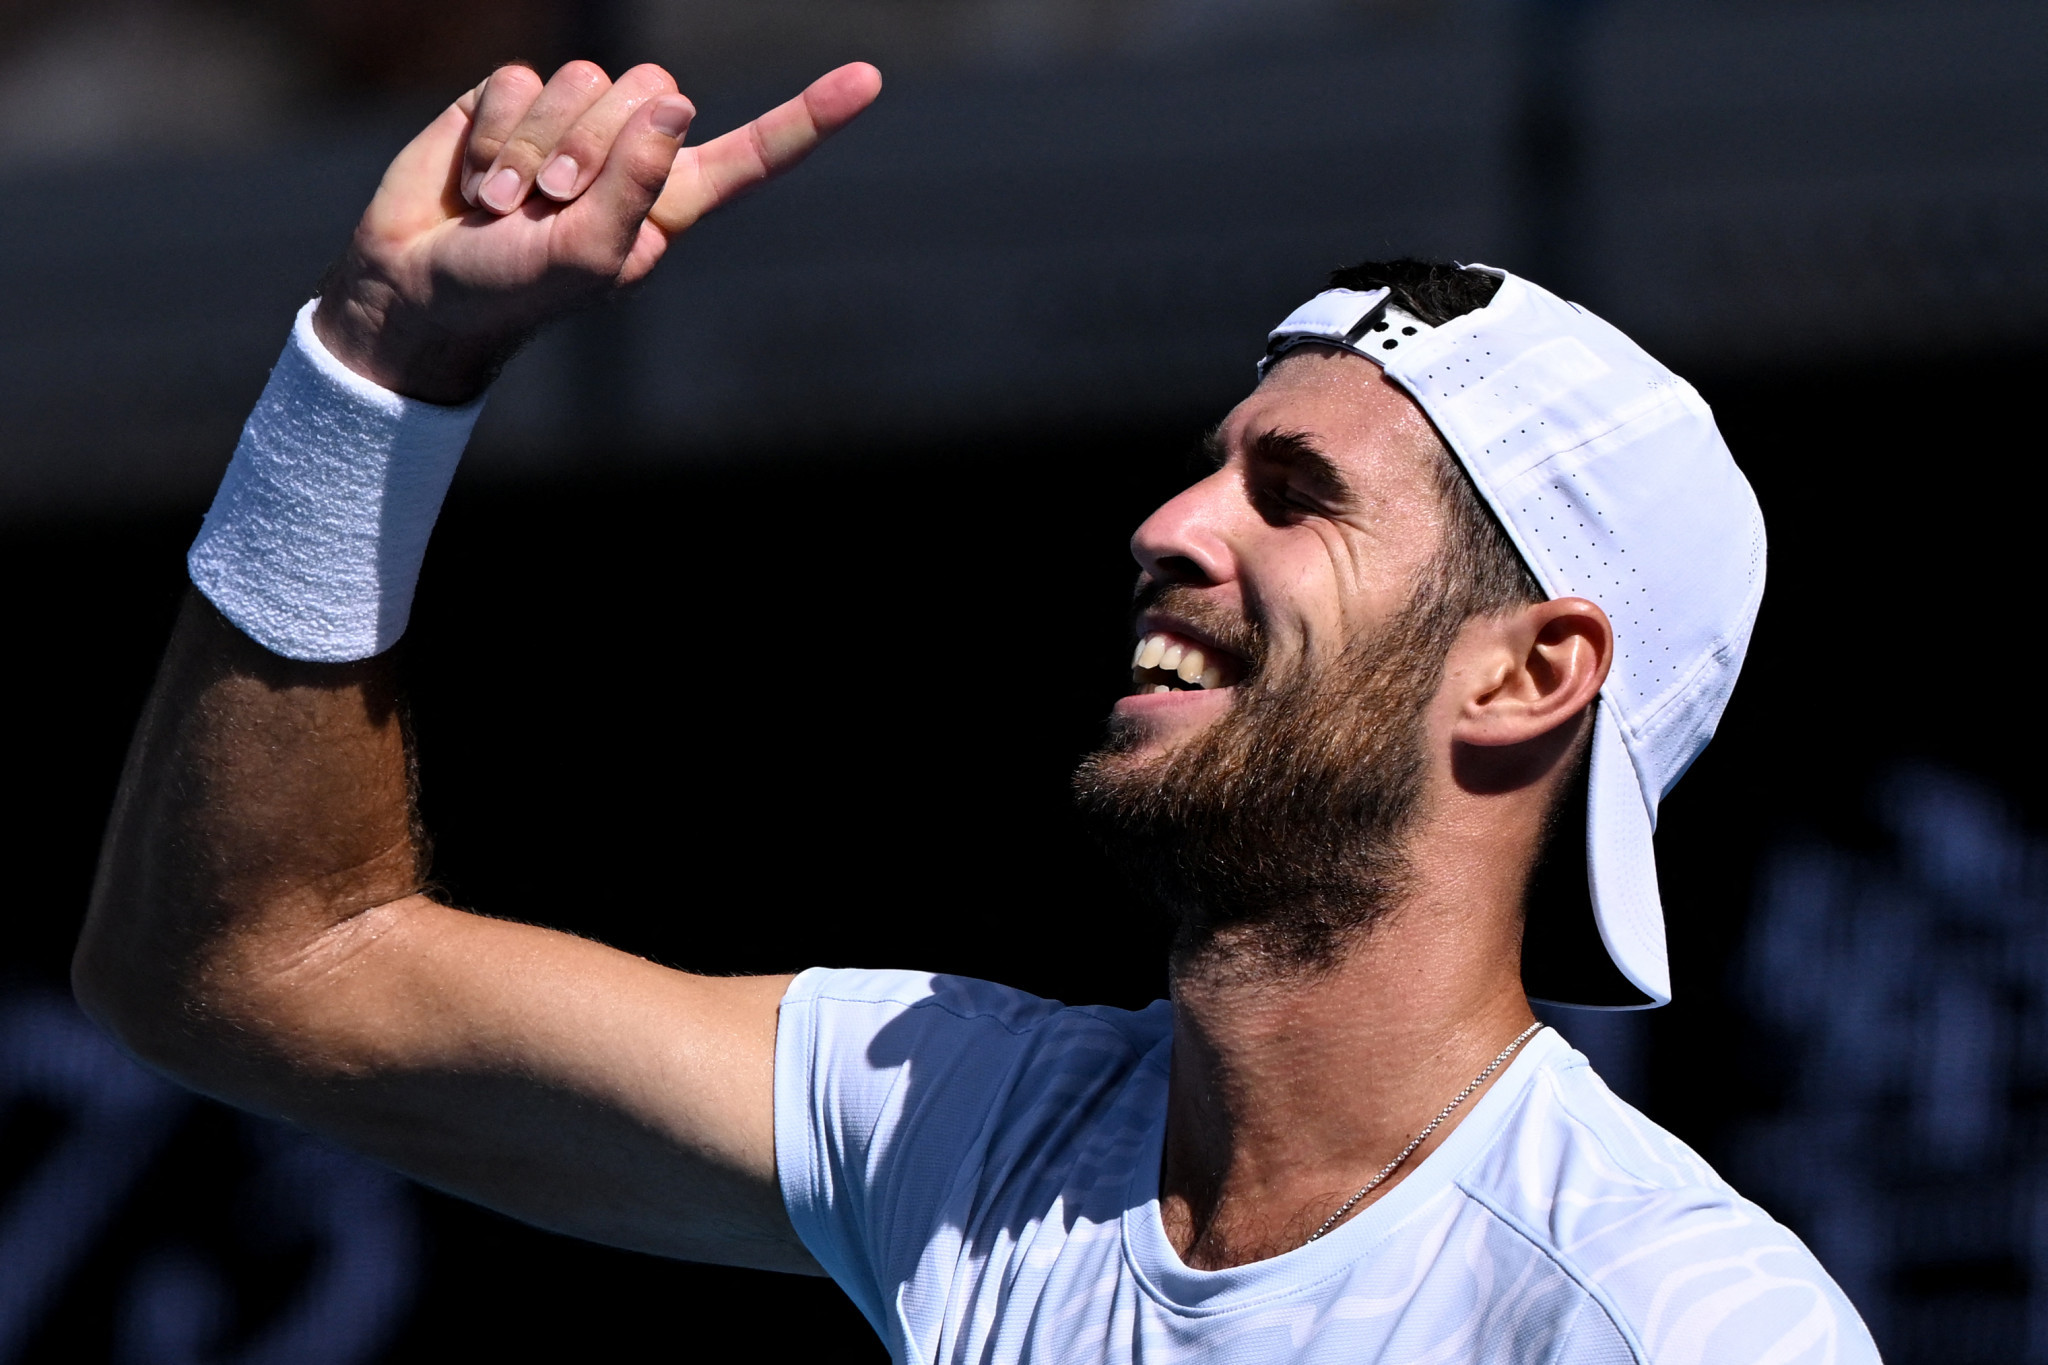 Russia’s Olympic silver medallist Karen Khachanov has angered Azerbaijan with his public display of support at the Australian Open for the Nagorno-Karabakh Republic ©Getty Images